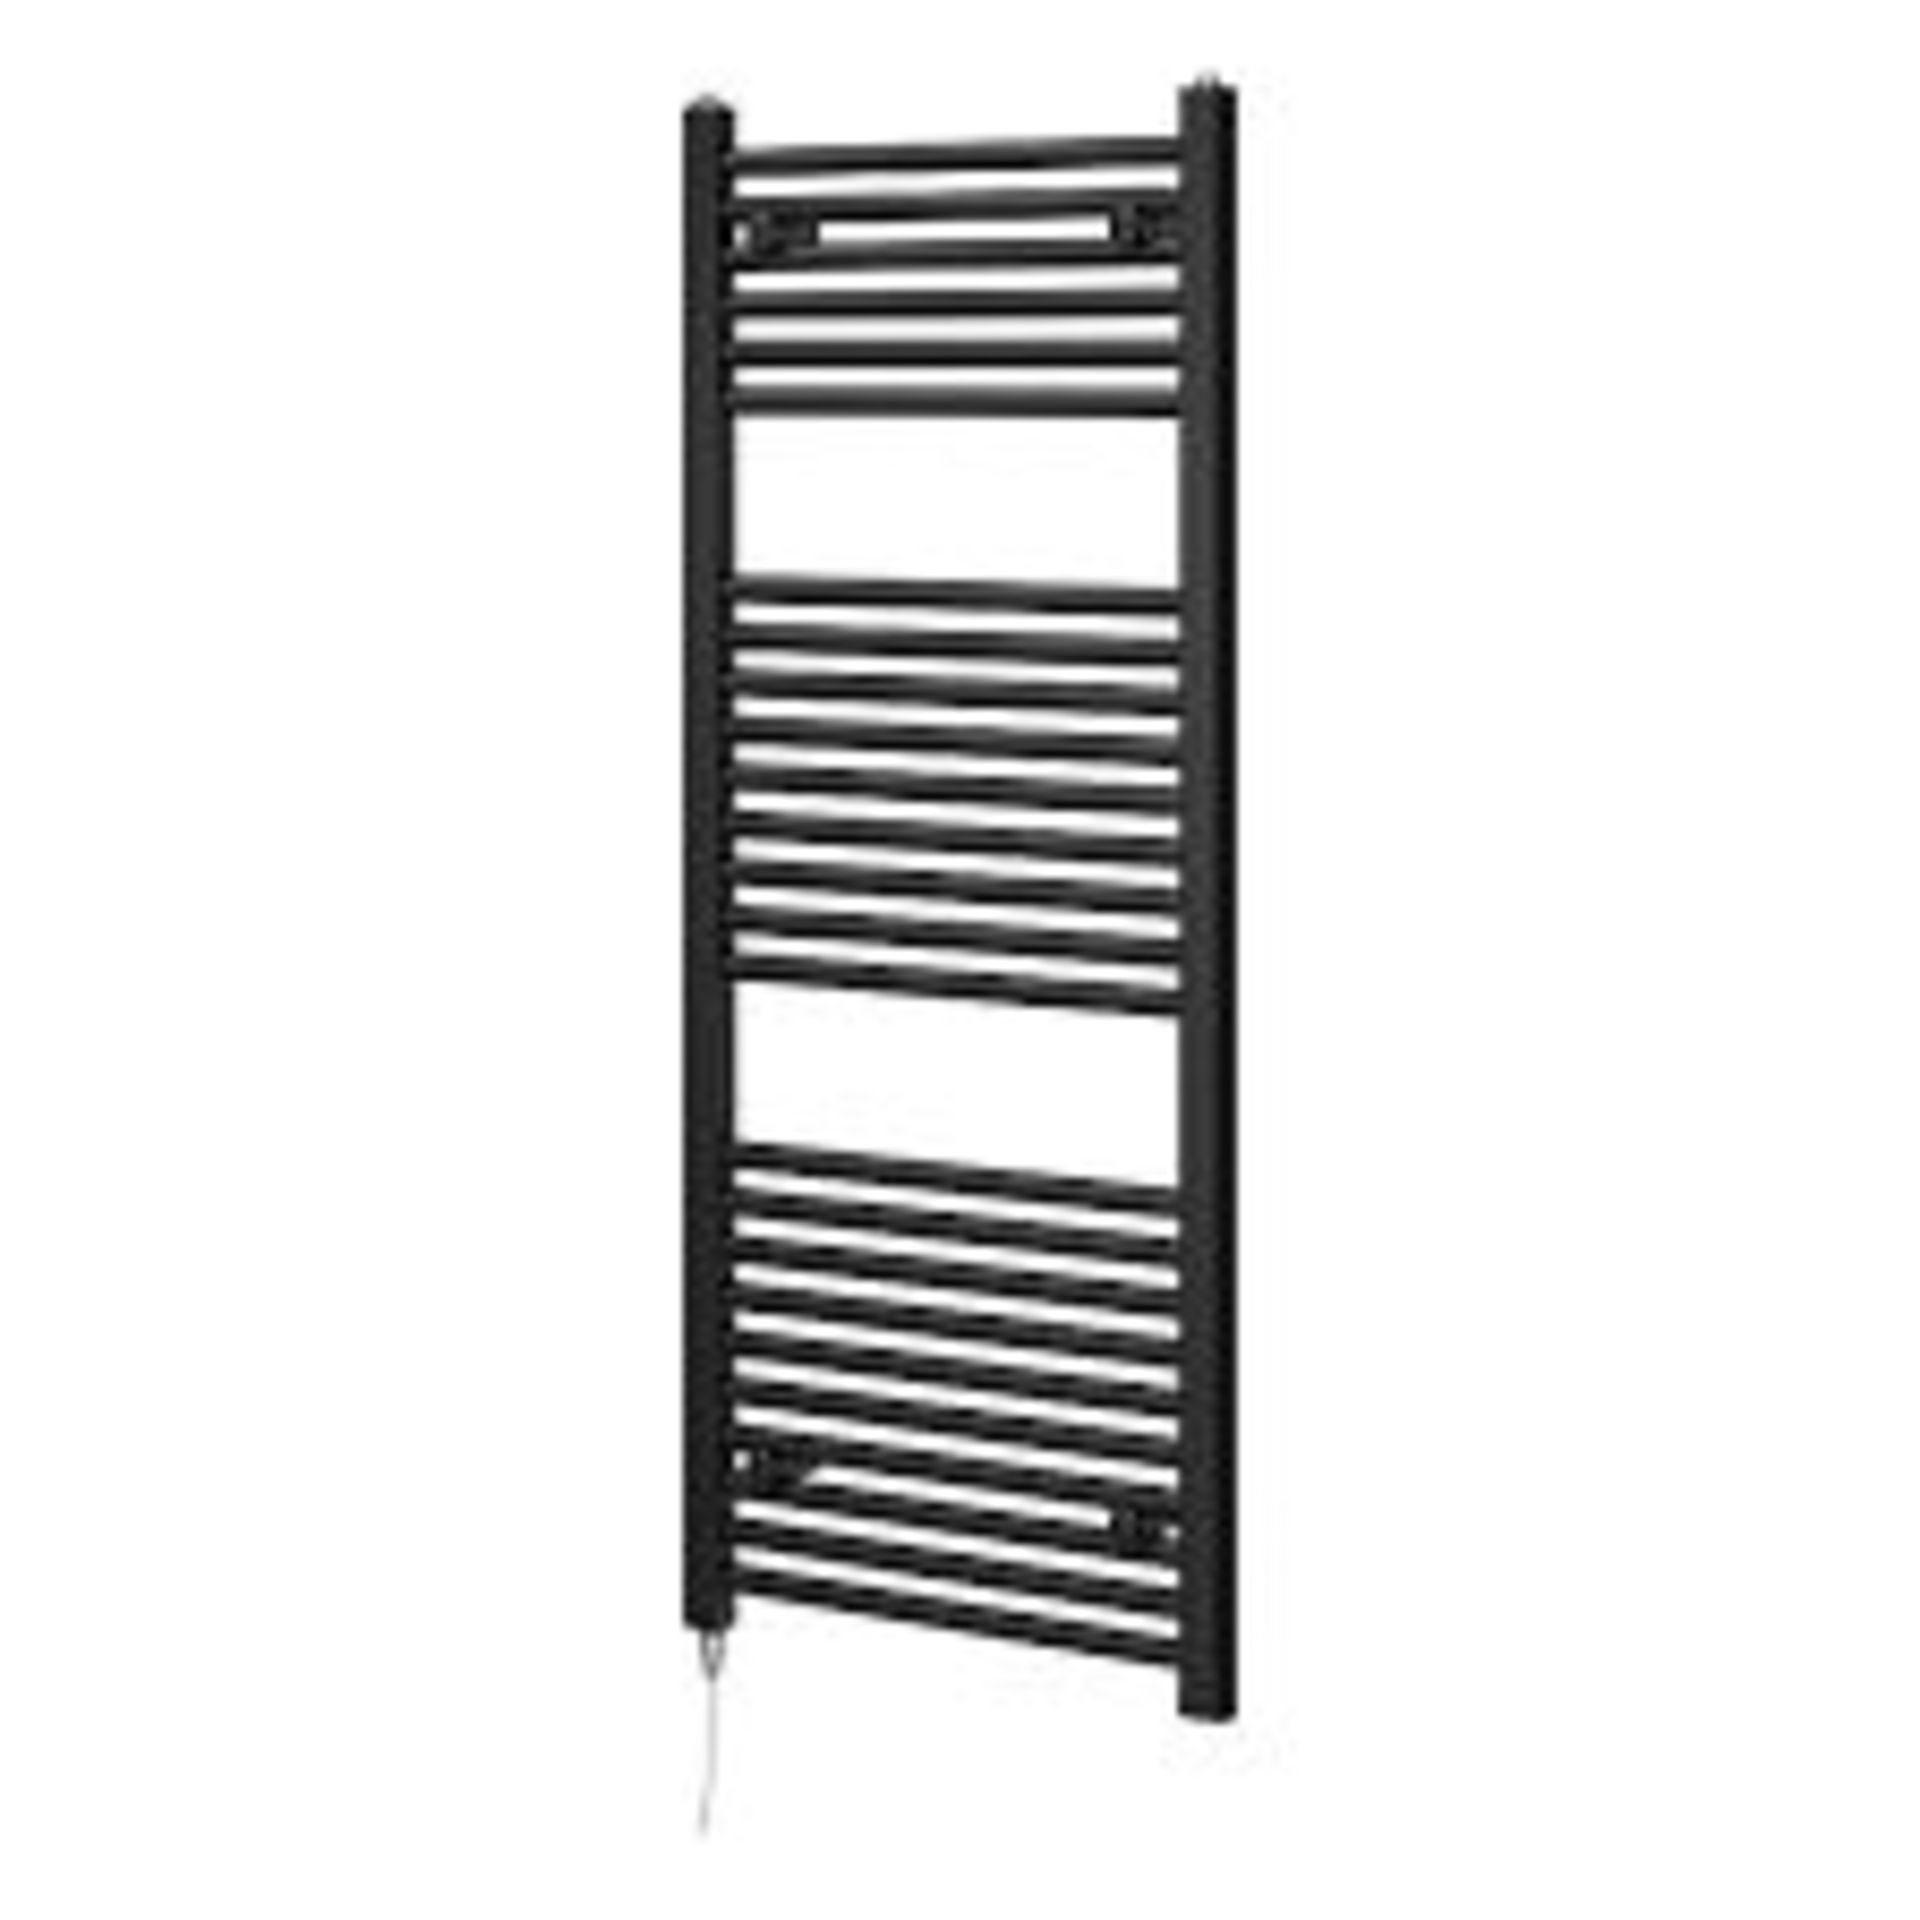 Triton Black Electric Heated Towel Rail - 1200x500mm. - R14.7. Say goodbye to damp towels, and hello